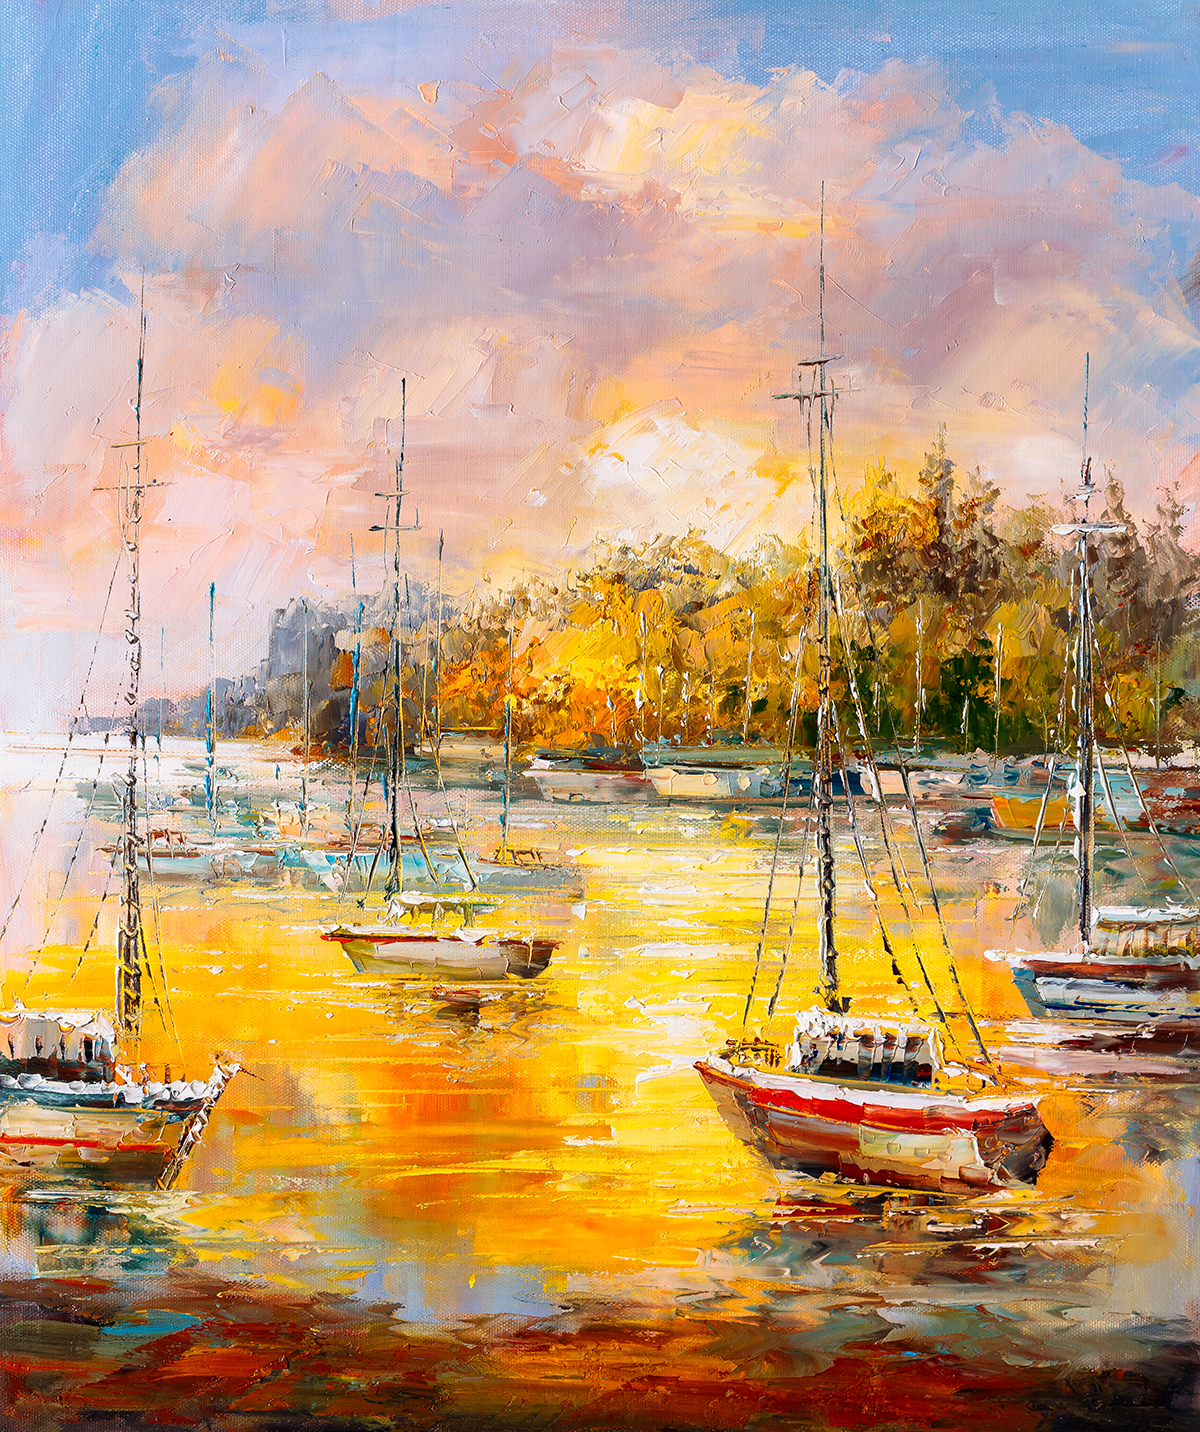 A painting of boats in a harbor